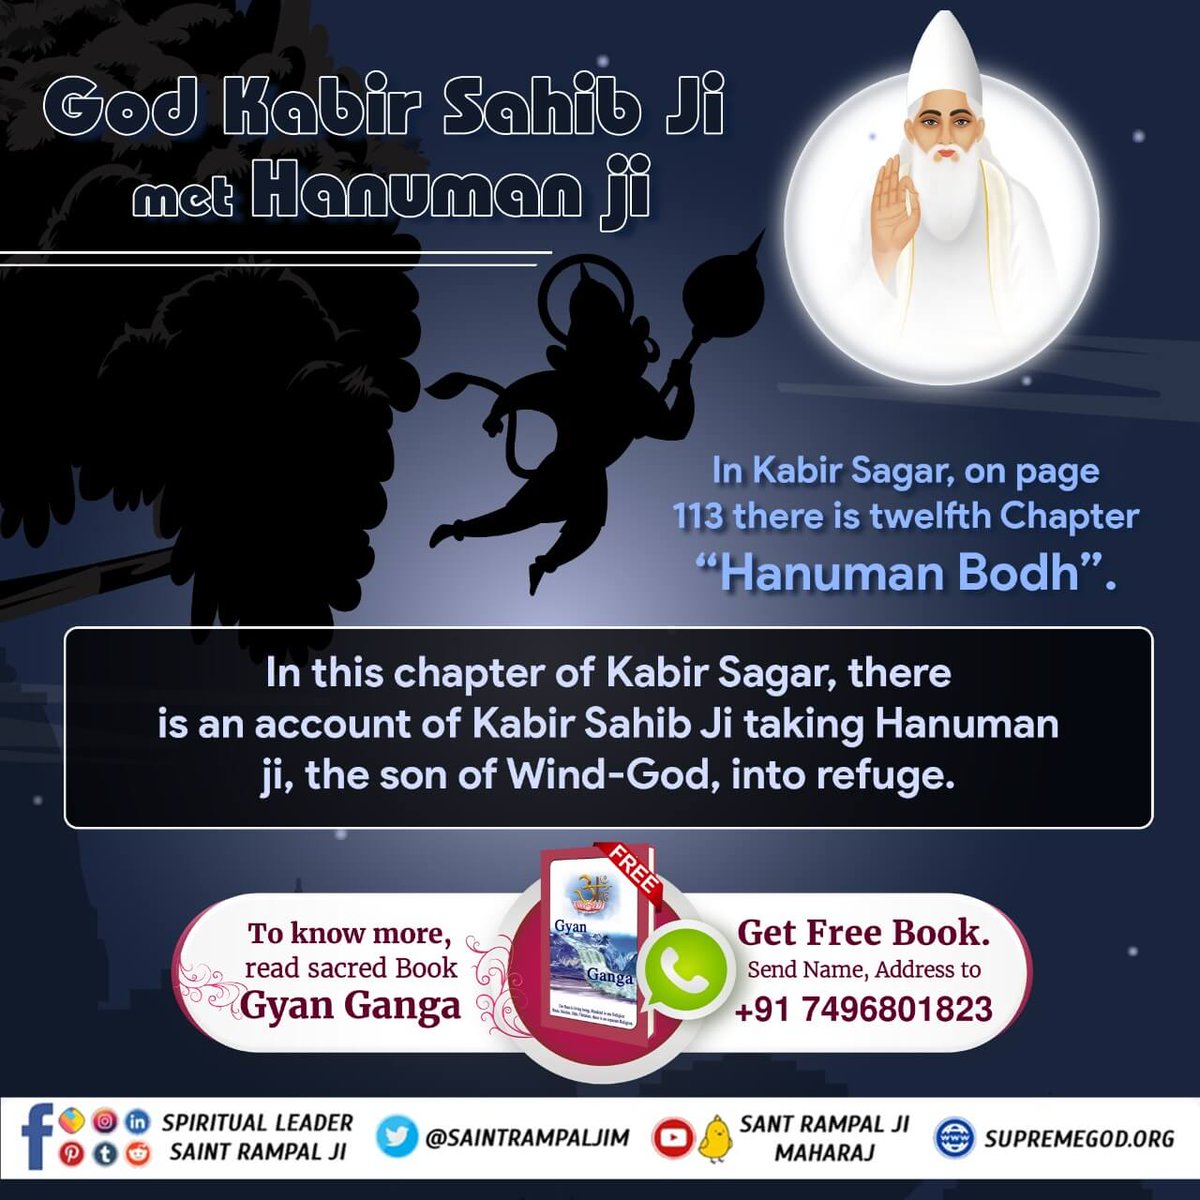 #आँखों_देखा_भगवान_को सुनो उस अमृतज्ञान को
In Kabir Sagar, on page 113 there is twelfth Chapter 'Hanuman Bodh'.

In this chapter of Kabir Sagar, there is an account of Kabir Ji taking Hanuman ji,the son of Wind-God, into refuge.

Download our Official App 'Sant Rampal Ji Maharaj'